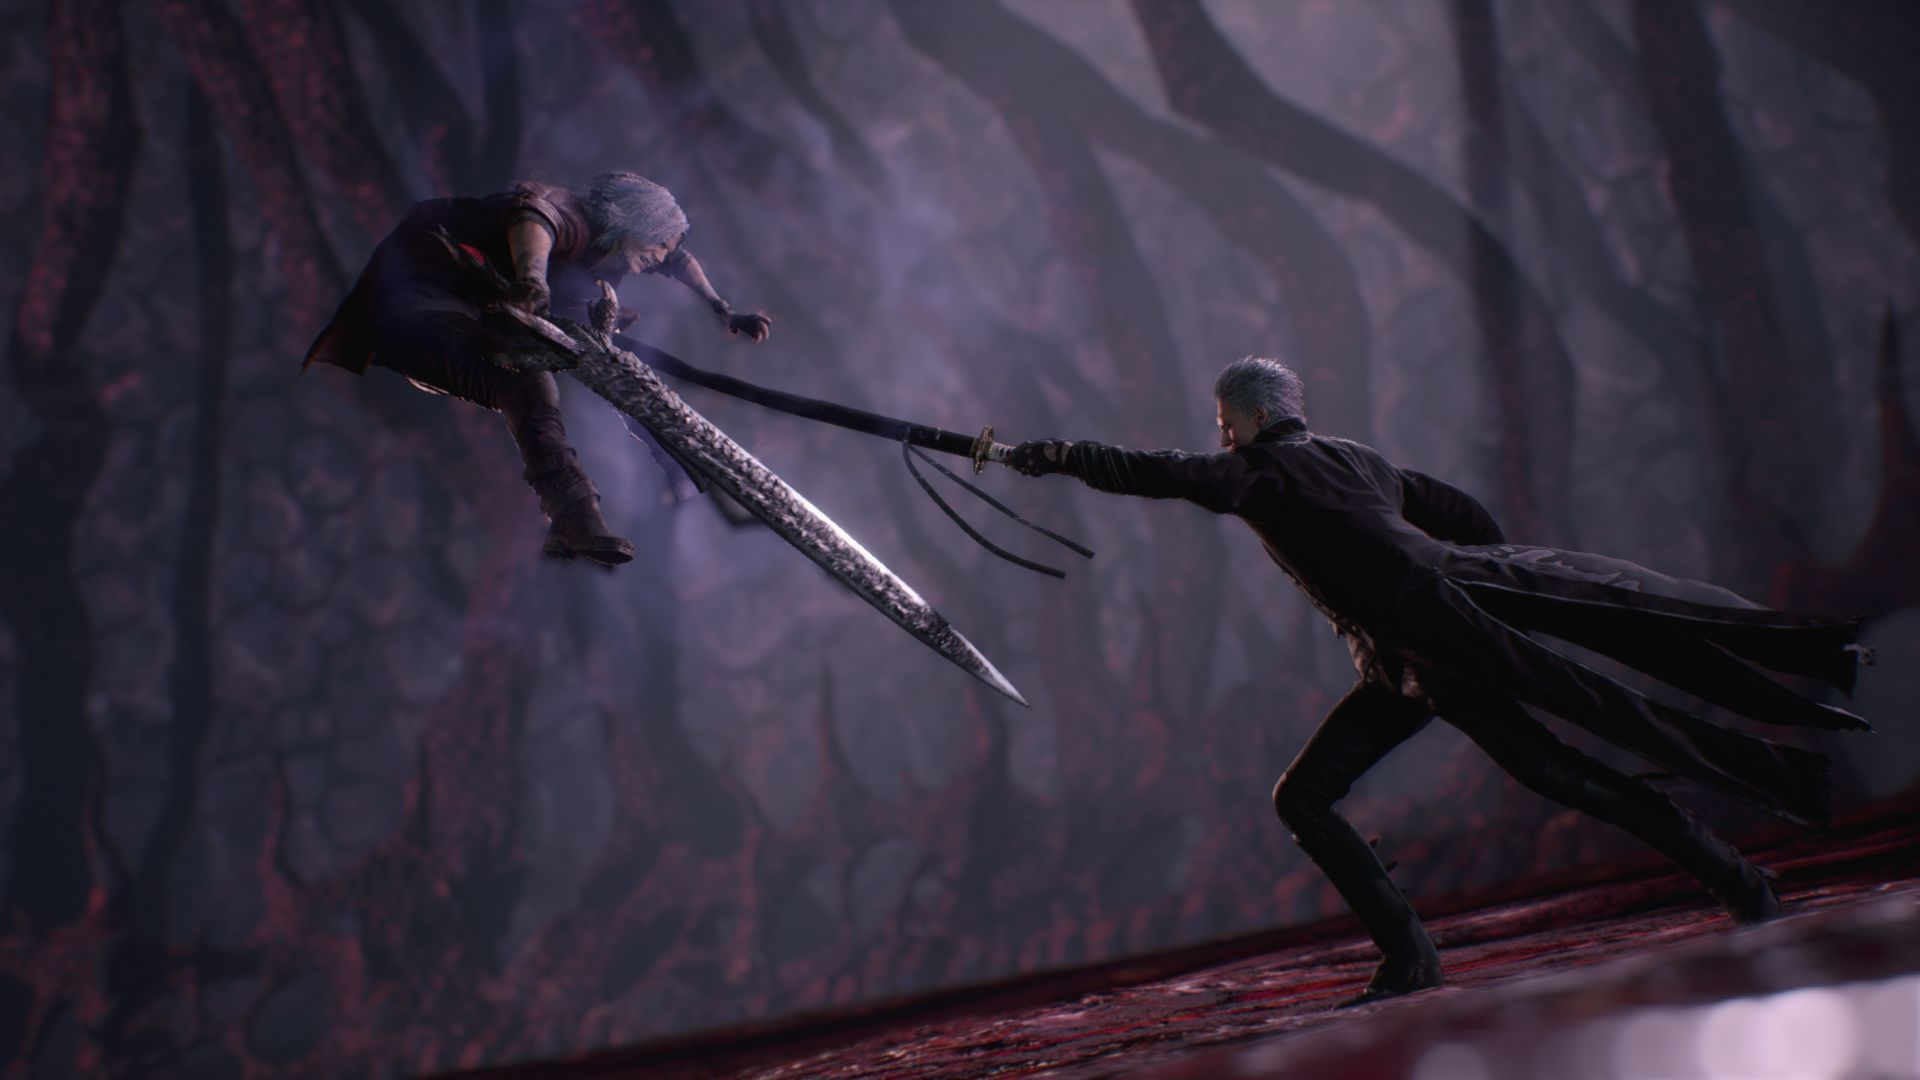 devil may cry 5, video game, dante (devil may cry), vergil (devil may cry), devil may cry